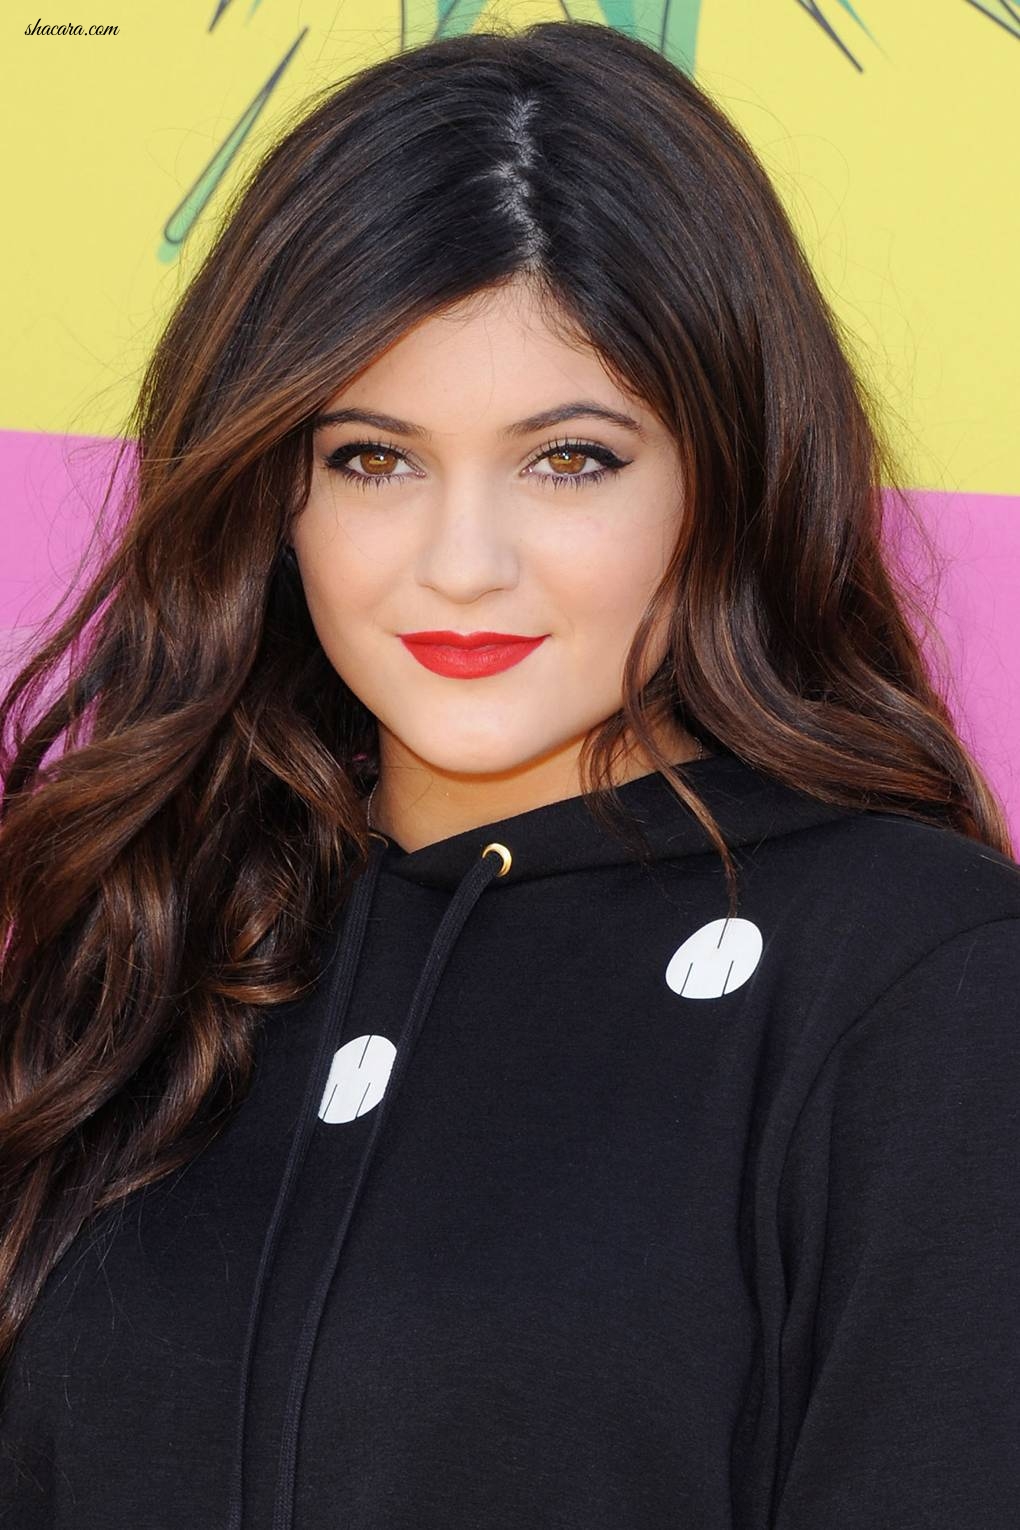 Kylie Jenner: Hair Style File